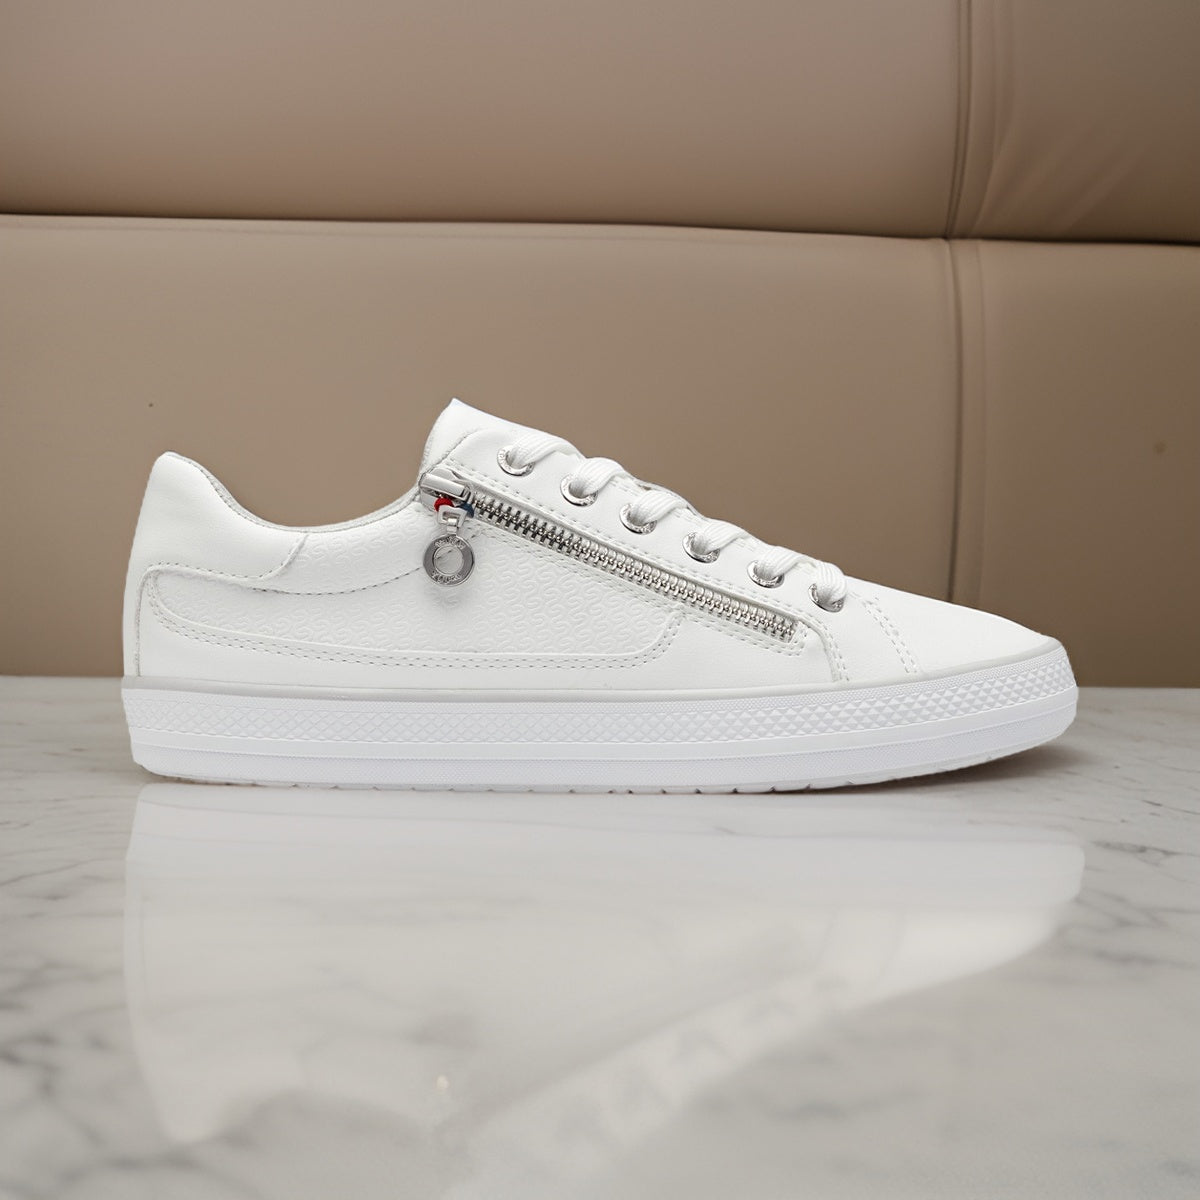 S.Oliver White Runner Style Sneakers for Women - Classic Comfort